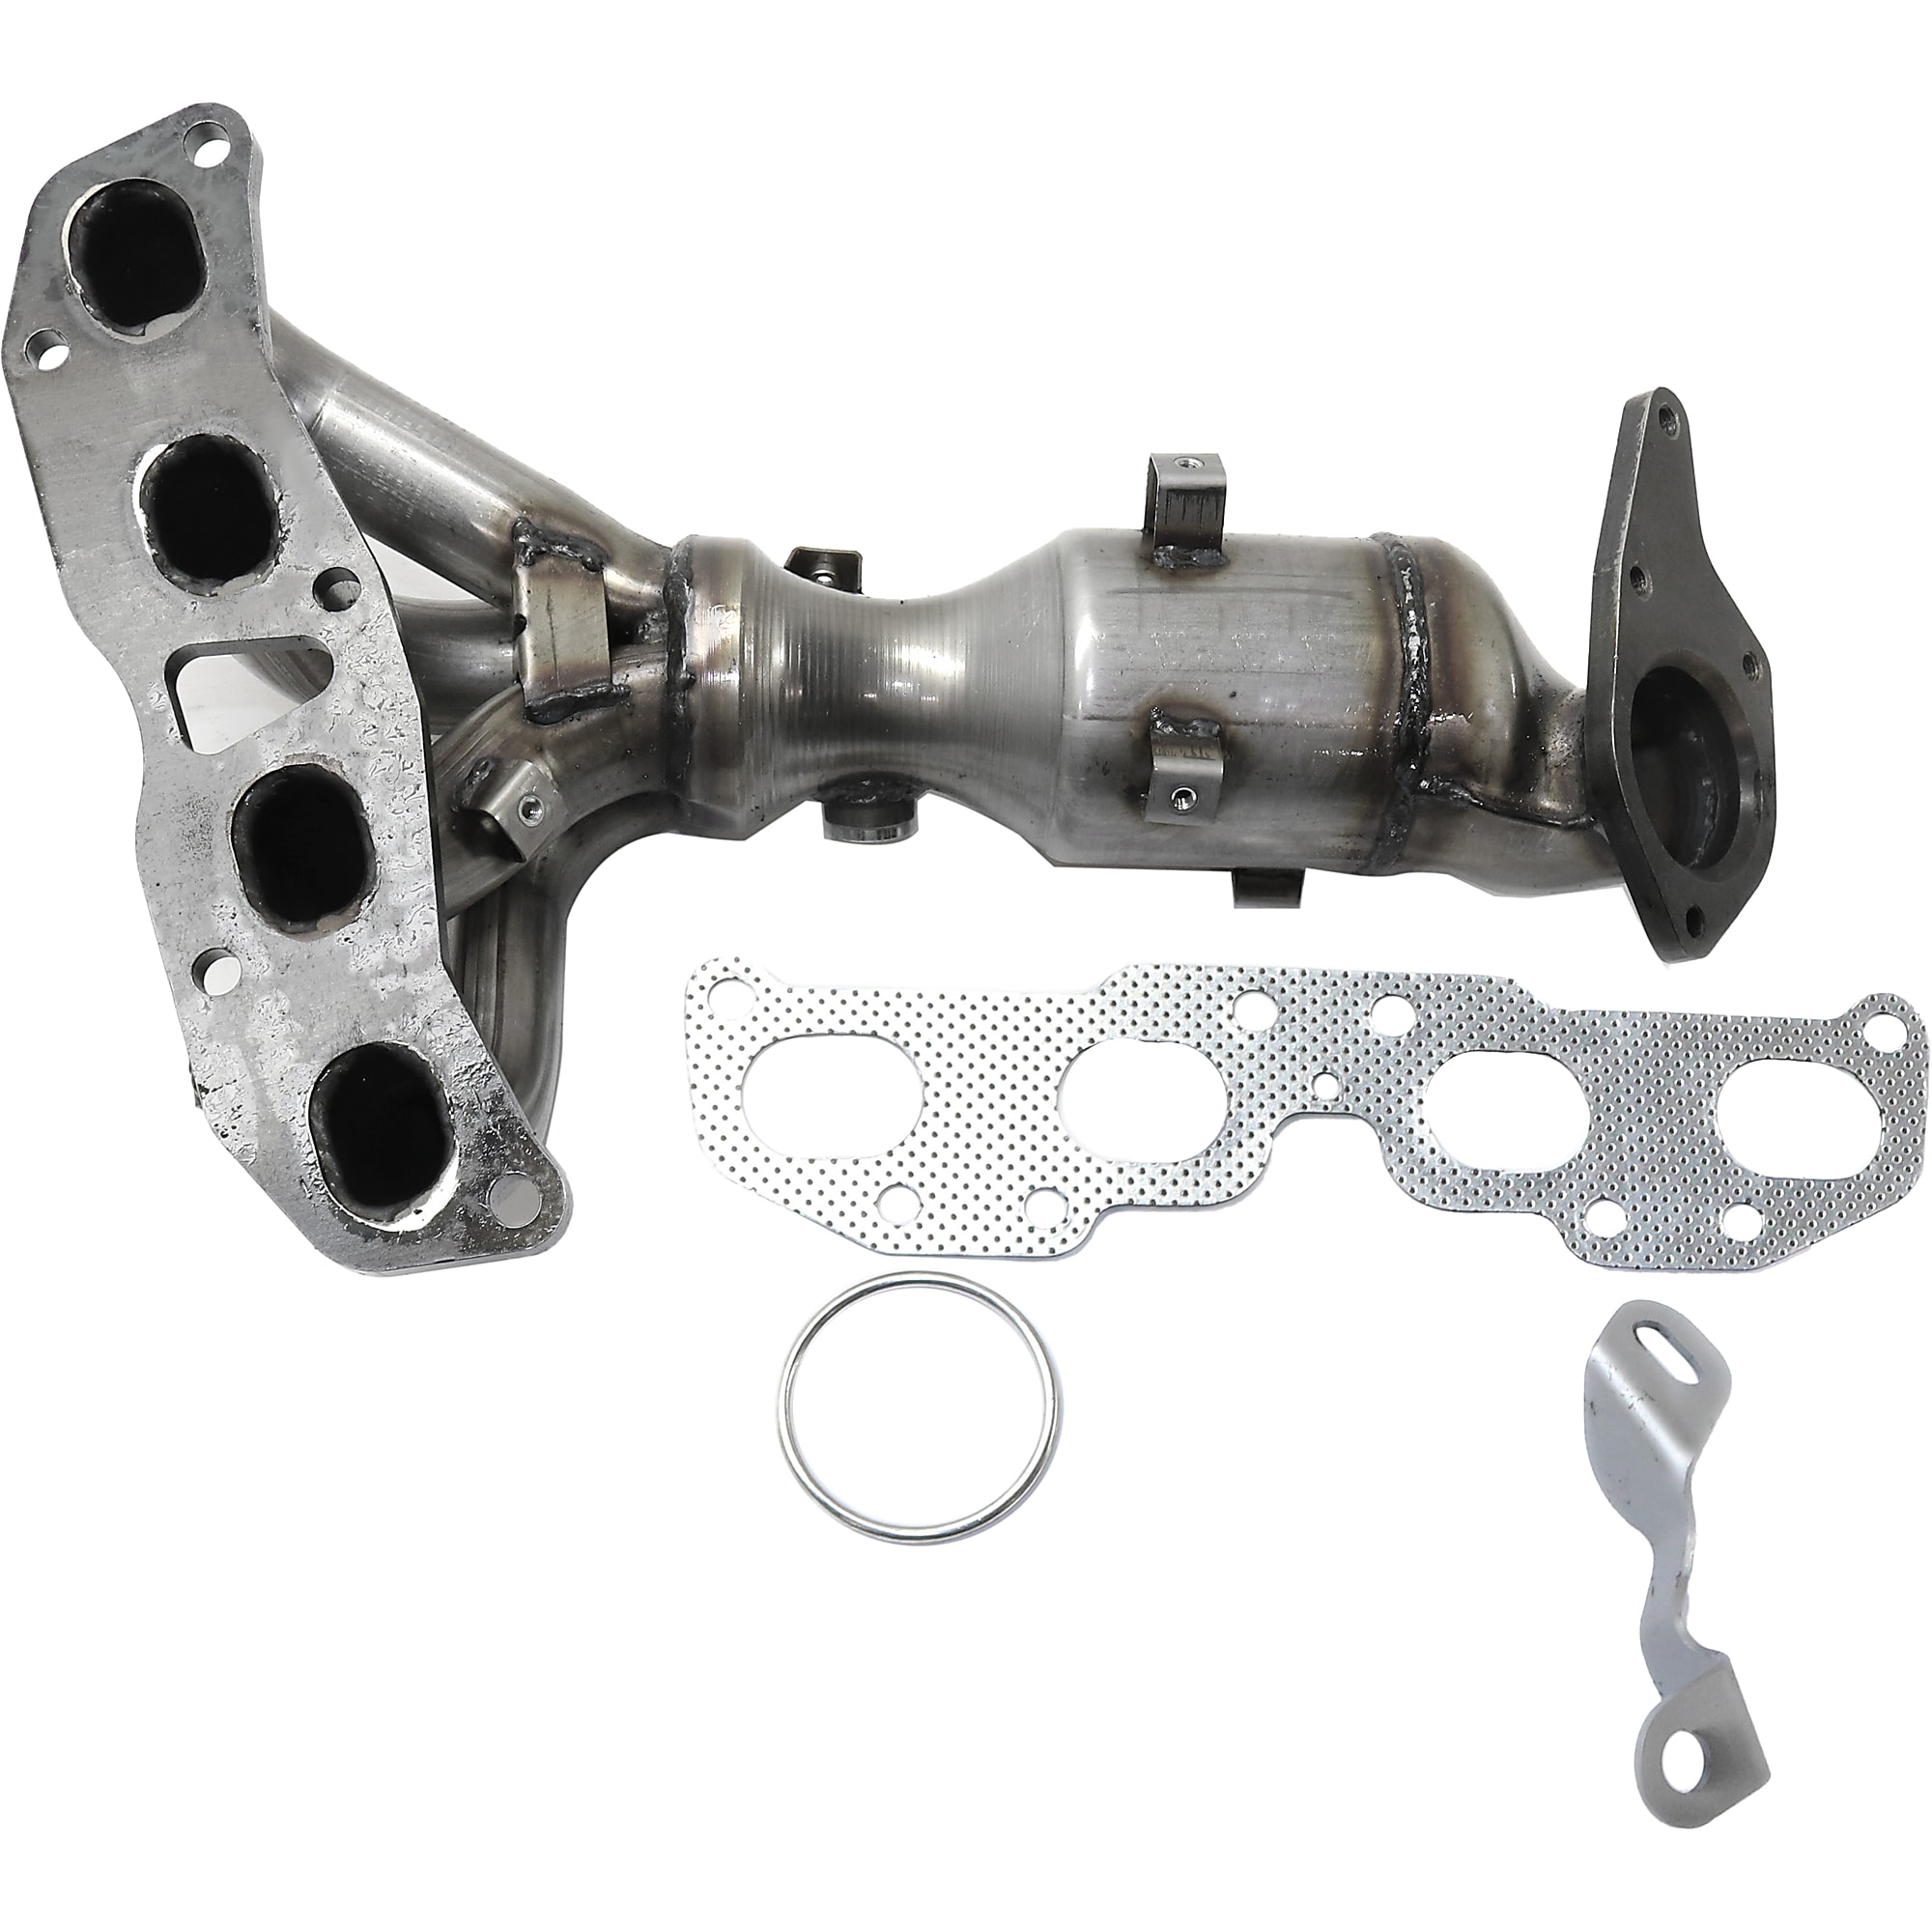 2010 Nissan Altima Catalytic Converters from $156 | CarParts.com 2010 Nissan Altima Catalytic Converter California Legal